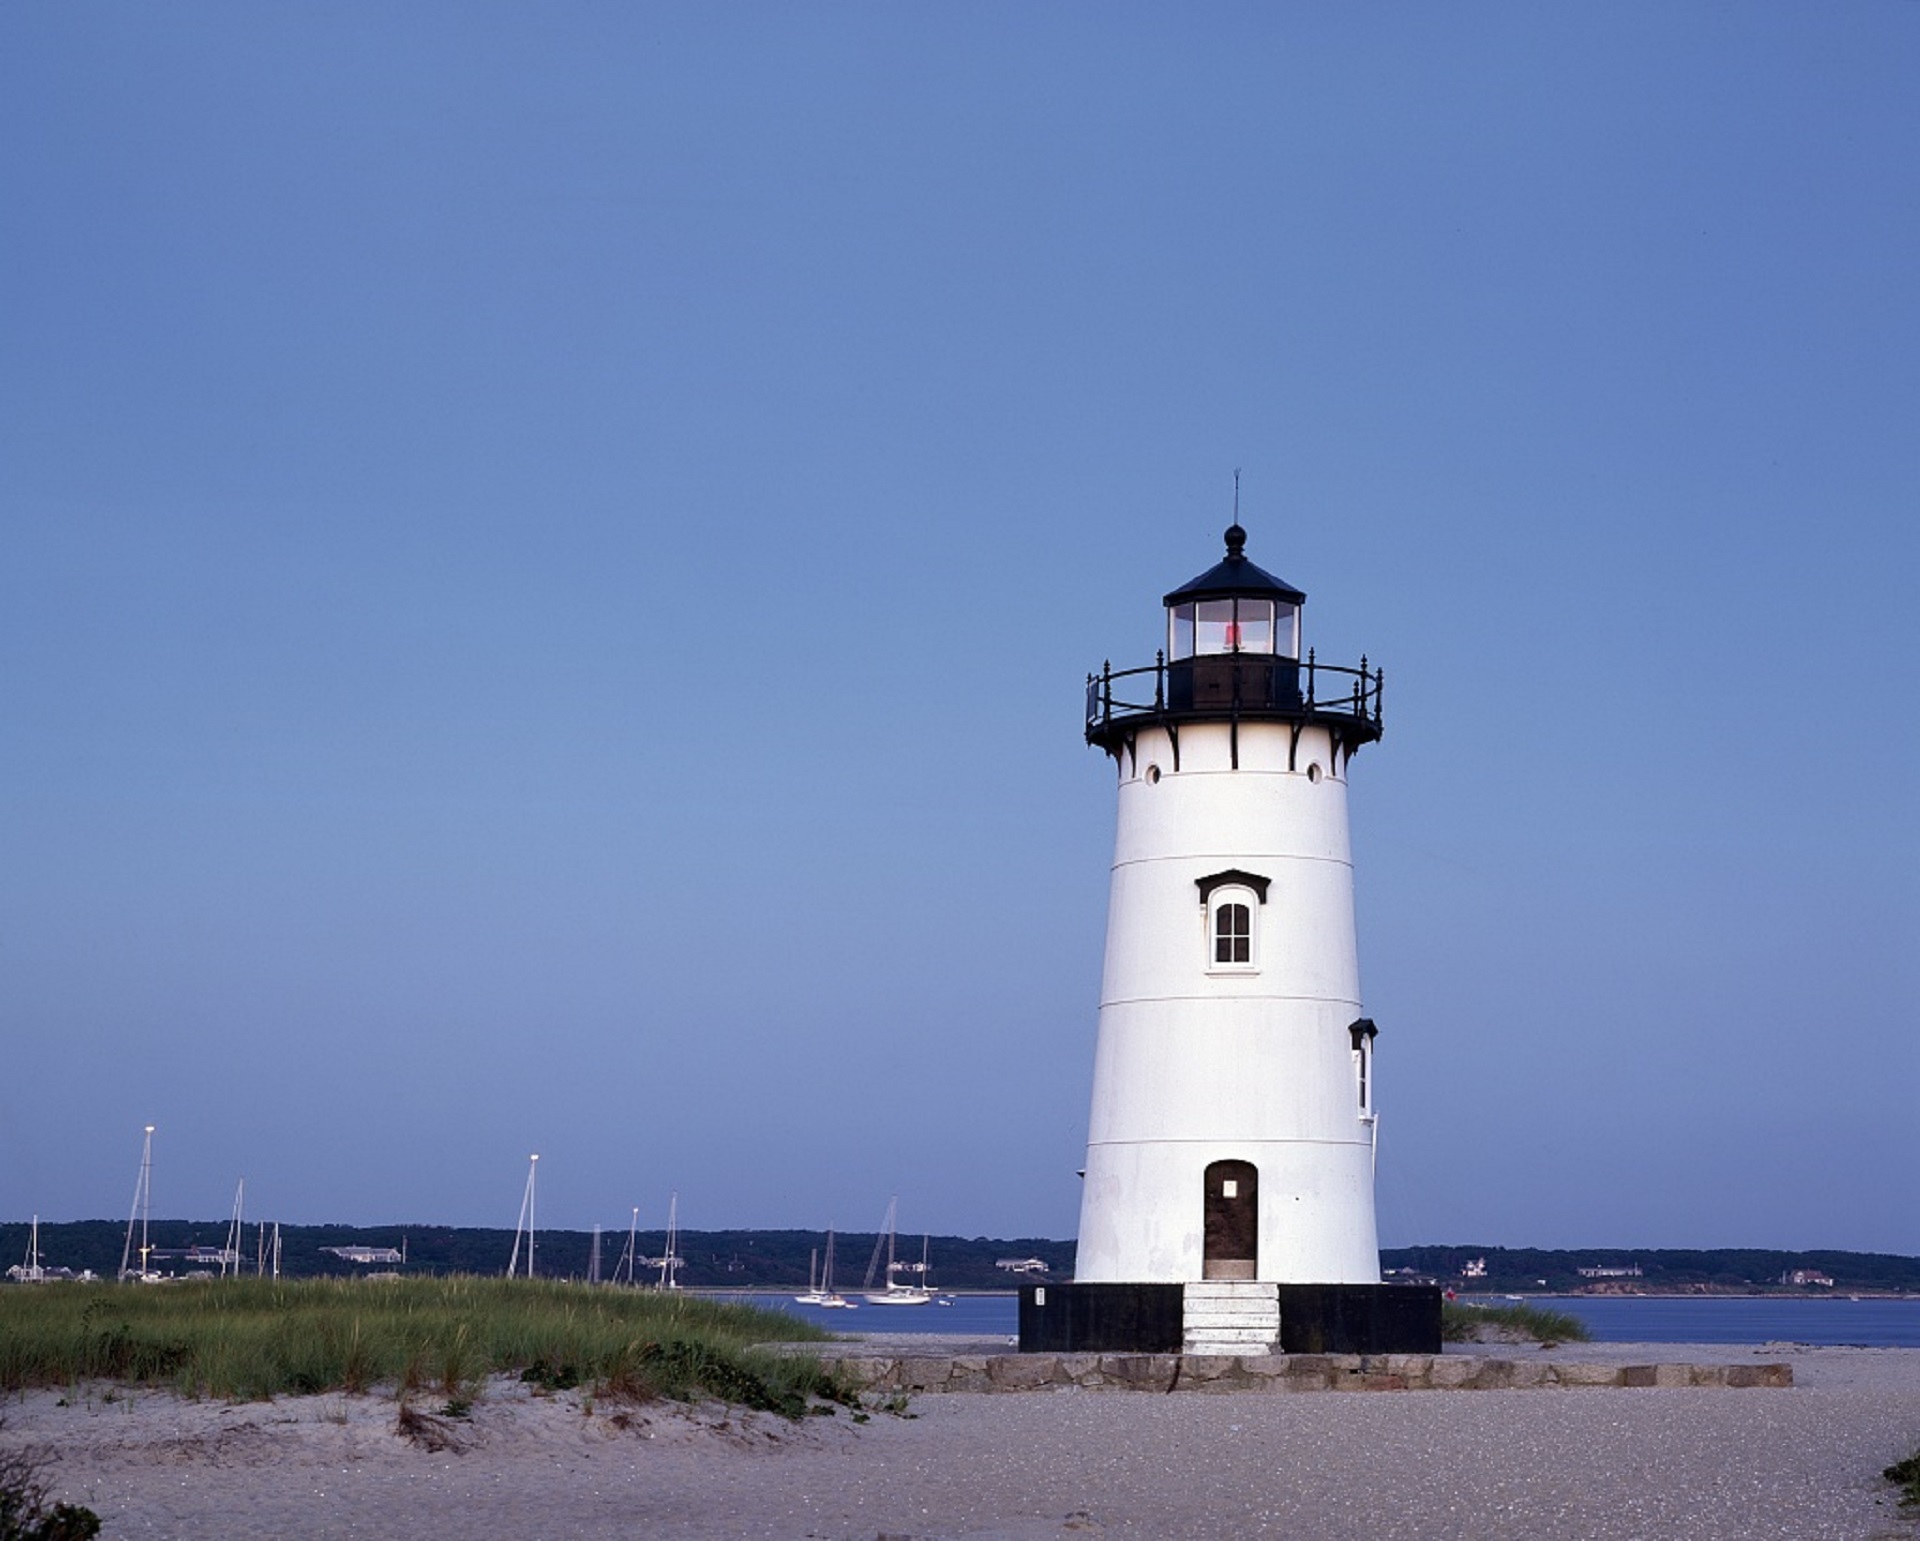 Lighthouse on the shore photo